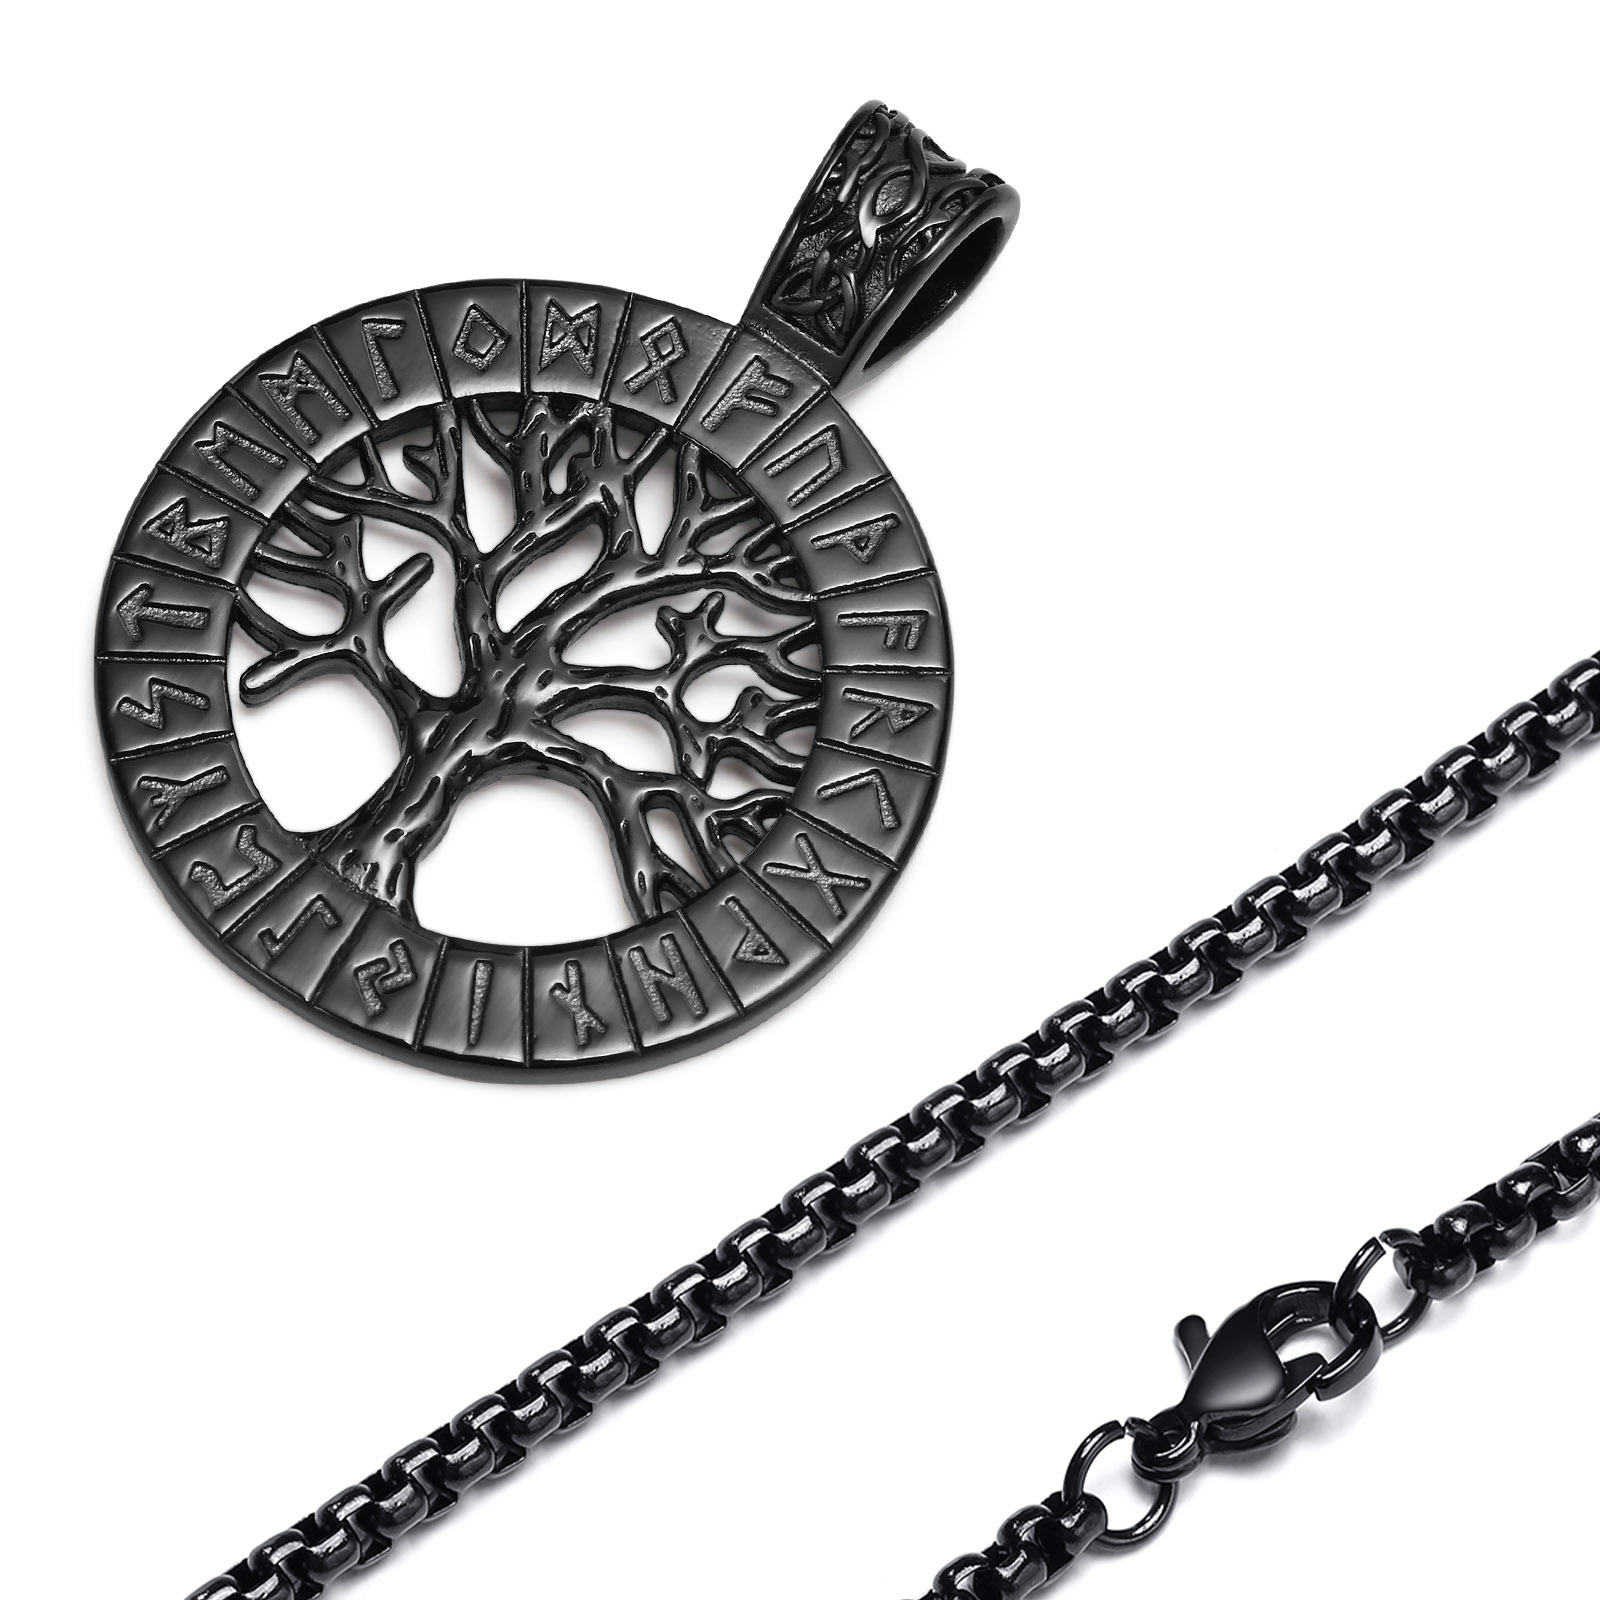 4:Black pendant with chain